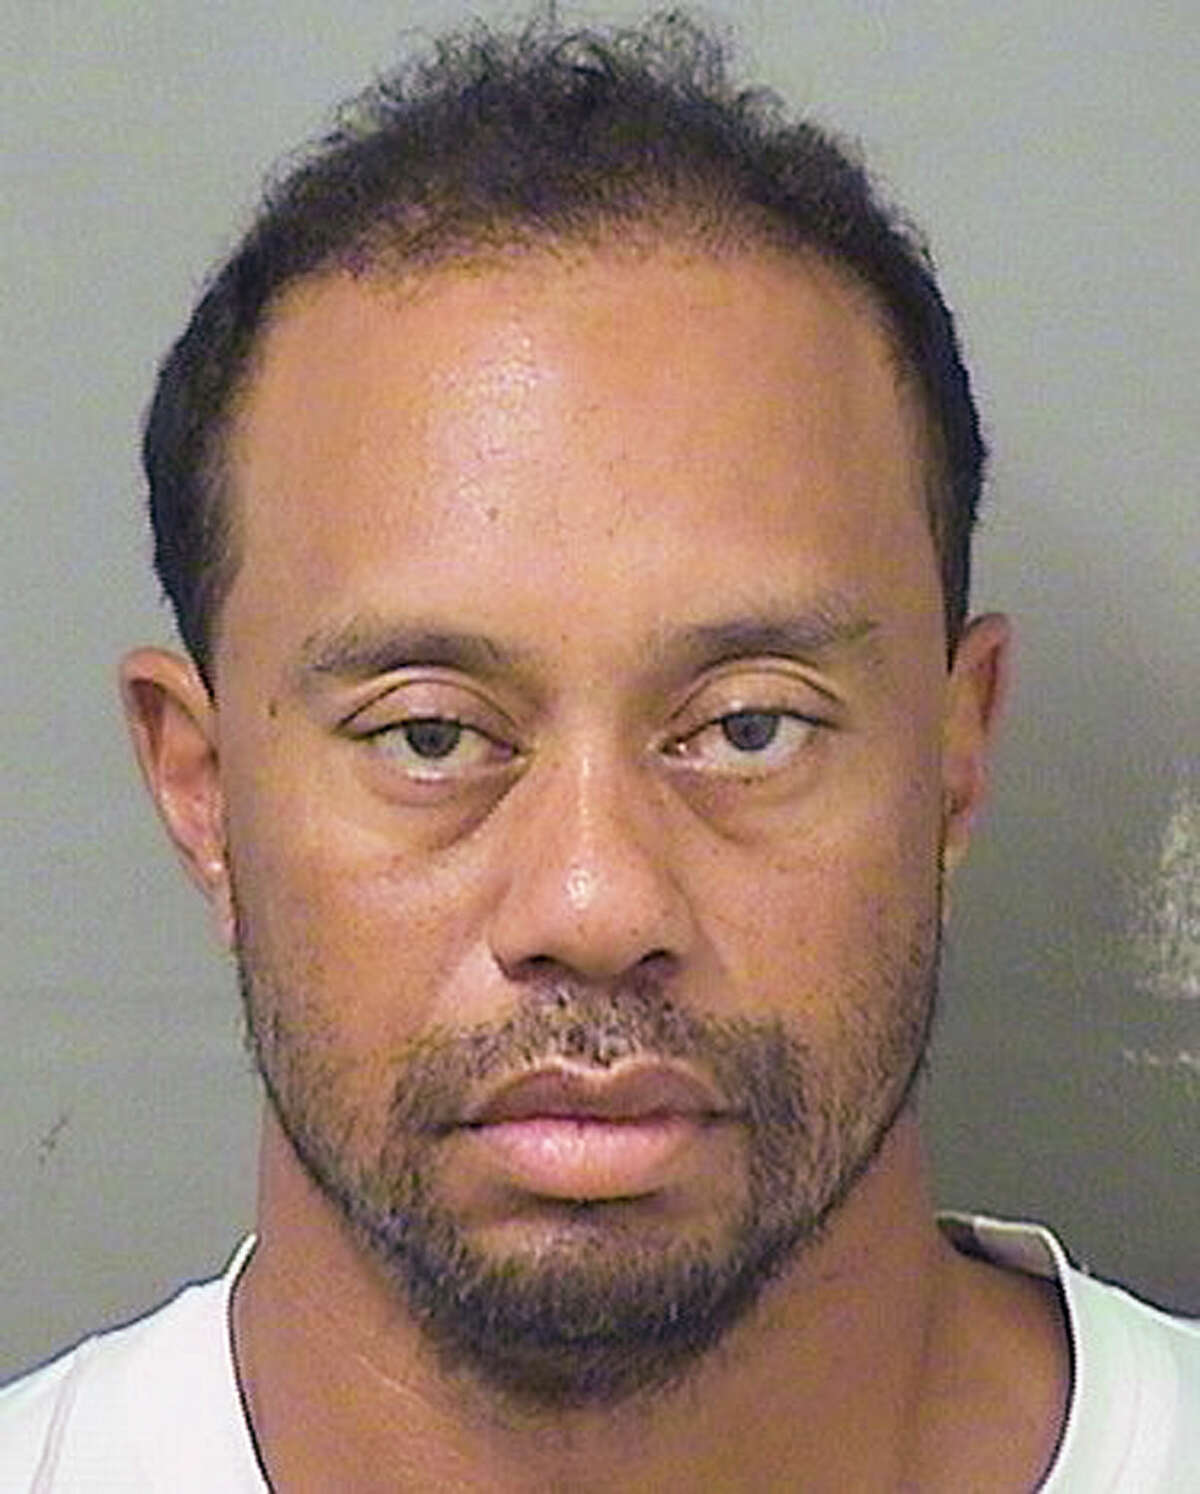 Tiger Woods is in a disheveled state in the booking photo from his DUI arrest.